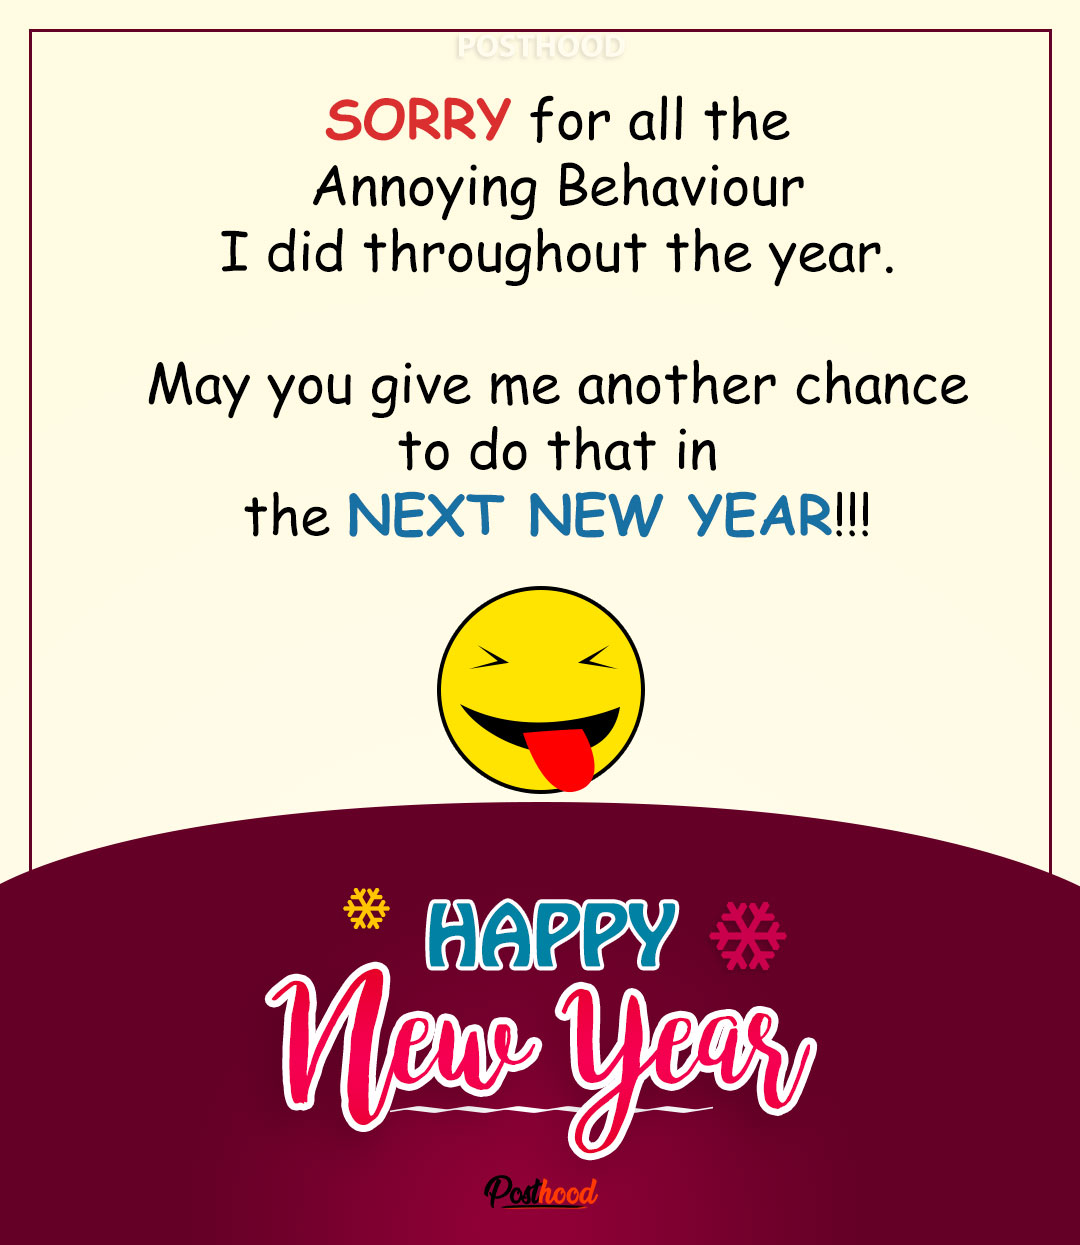 20 most hilarious and funny New Year wishes for friends and family. Let God give them strength to bear all of your annoying behaviors again this year. 